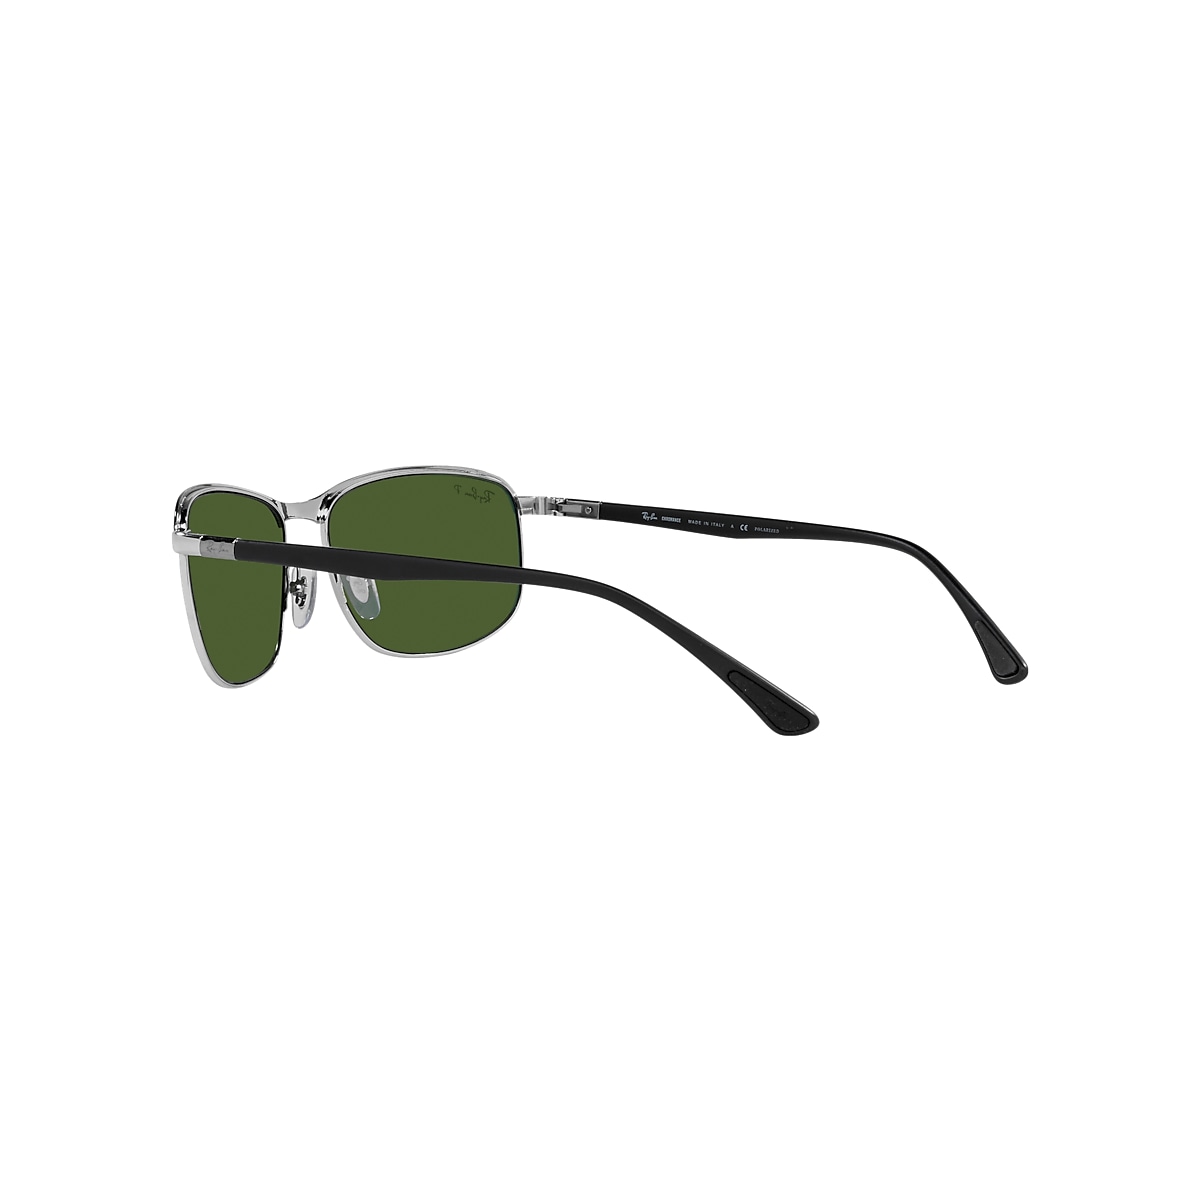 Rb3671ch Chromance Sunglasses in Black On Silver and Green 